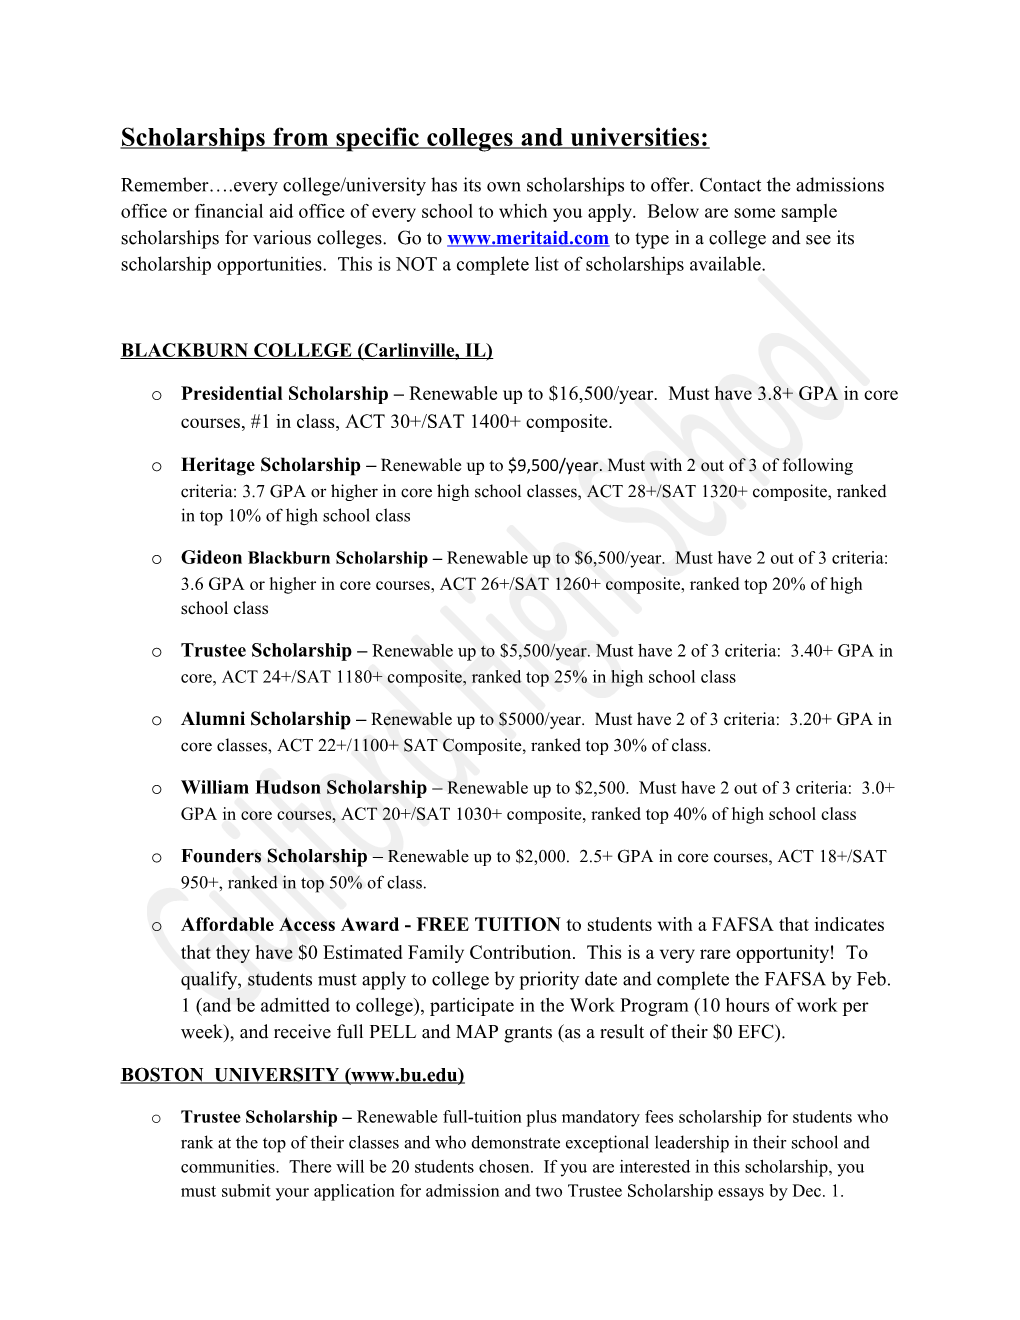 Scholarships from Specific Colleges and Universities s1